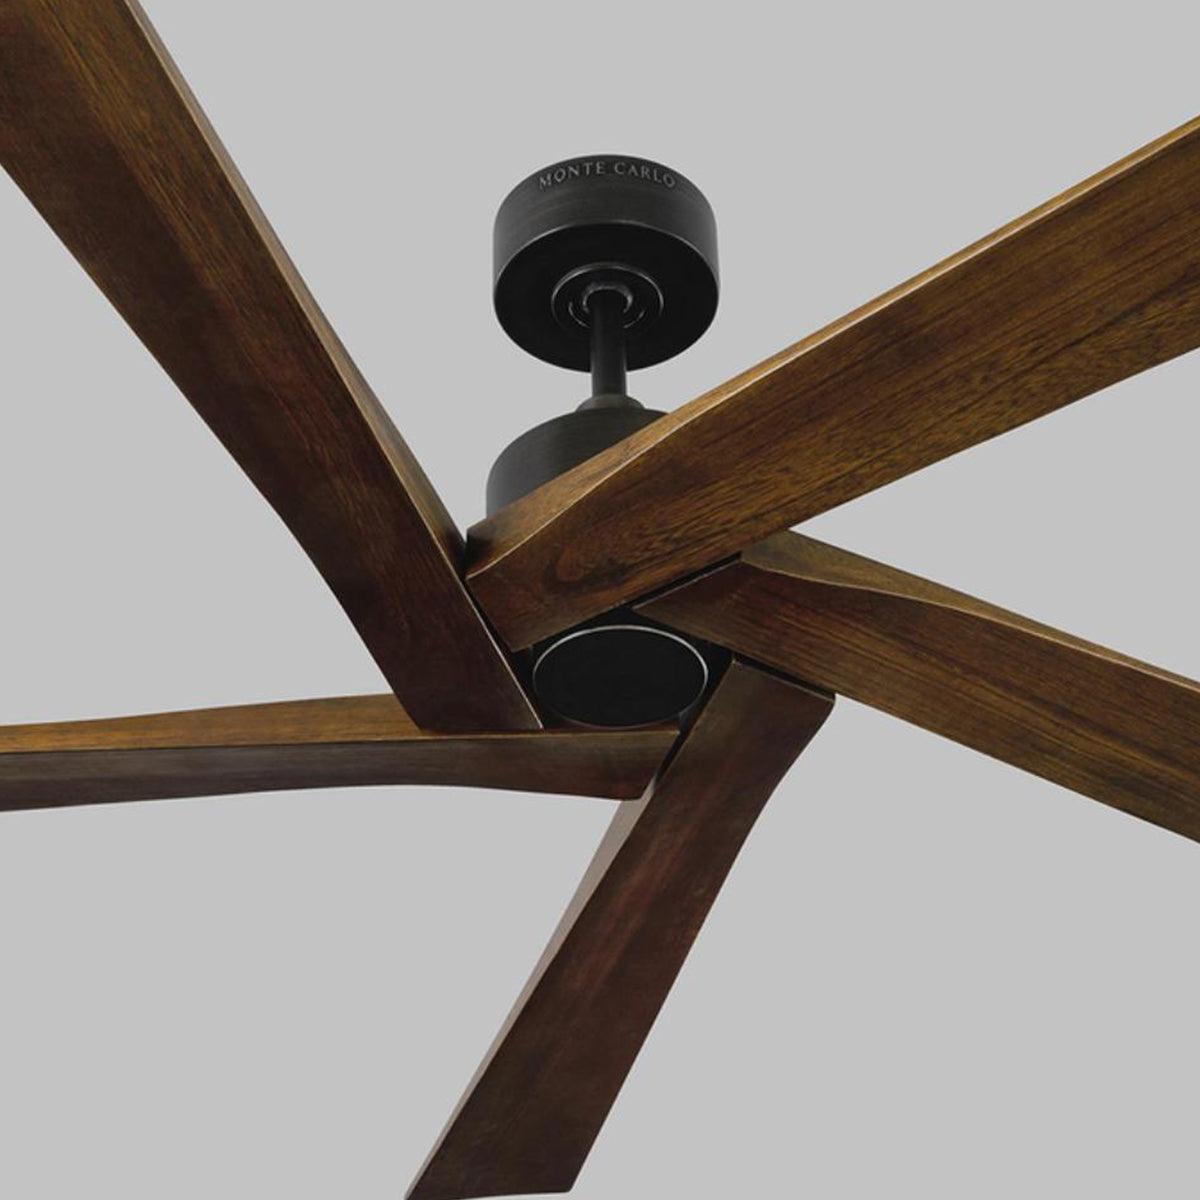 Aspen 56 Inch Ceiling Fan with Remote, Aged Pewter with Dark Walnut Blades - Bees Lighting